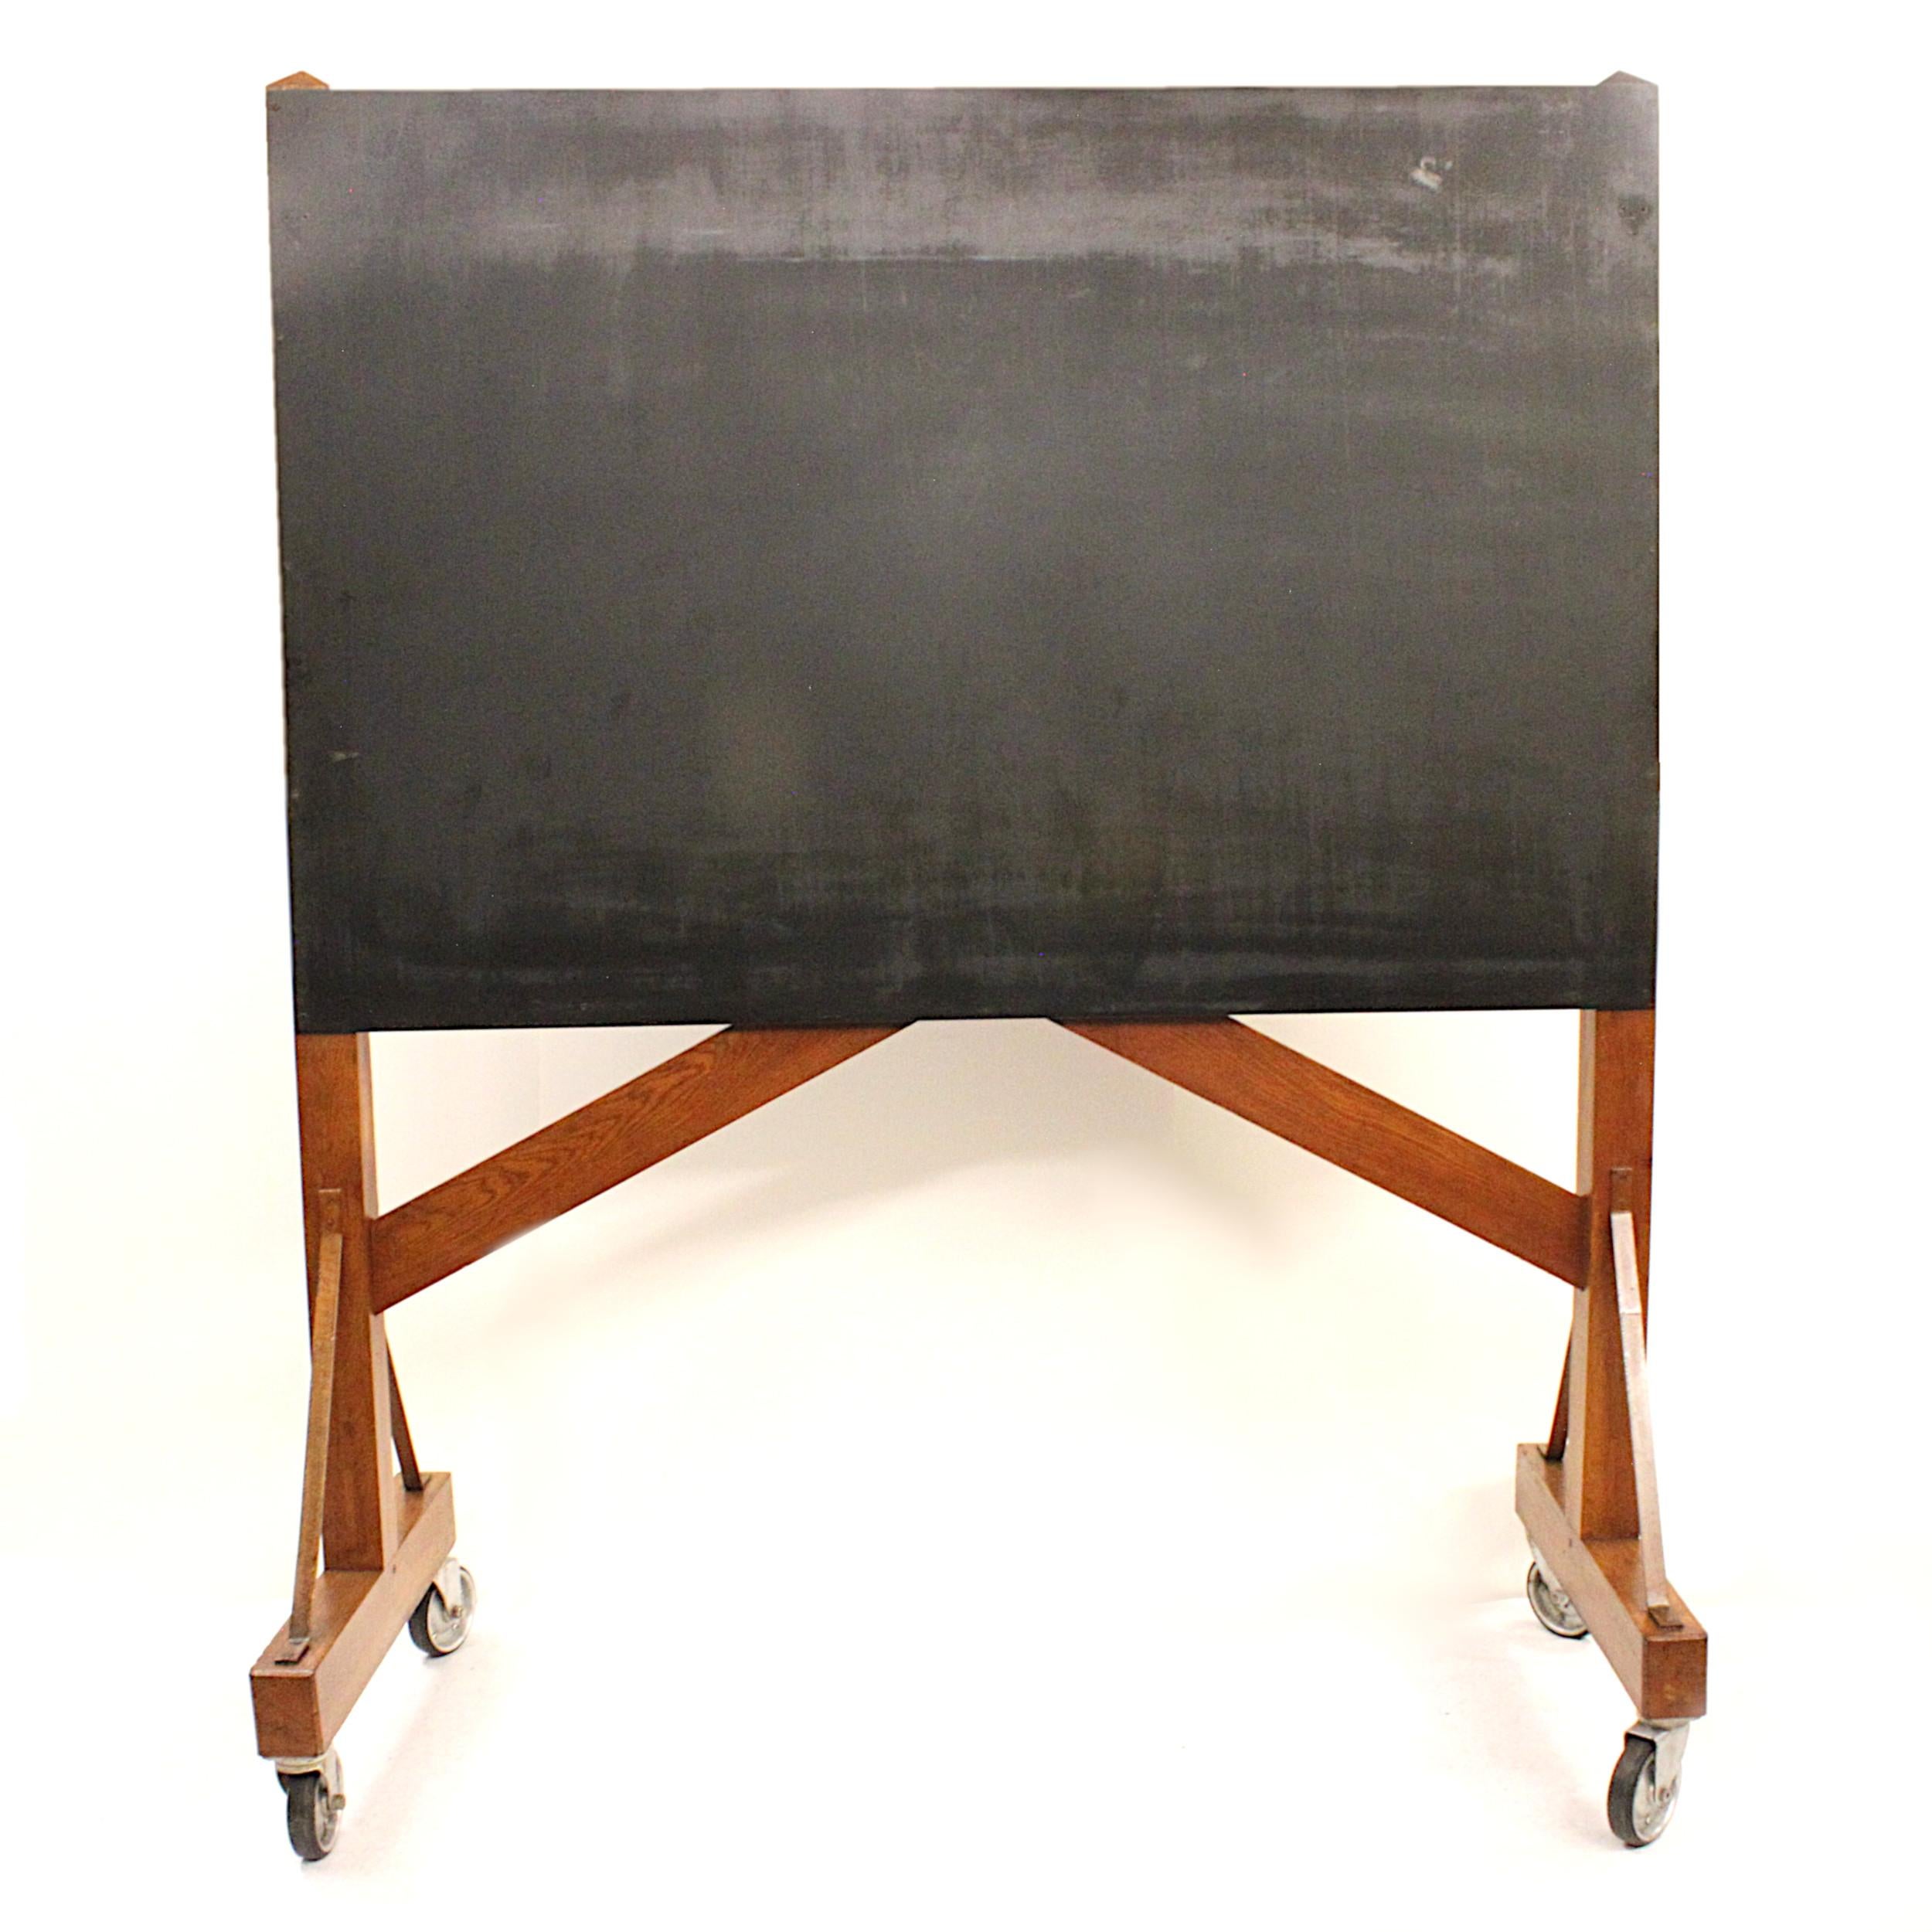 Spectacular 1940s vintage blackboard. Blackboard features a heavy-duty, solid-oak frame with steel braces and aluminium casters. The blackboard itself is actually a solid sheet of steel with blackboard treatment allowing you to both write with chalk